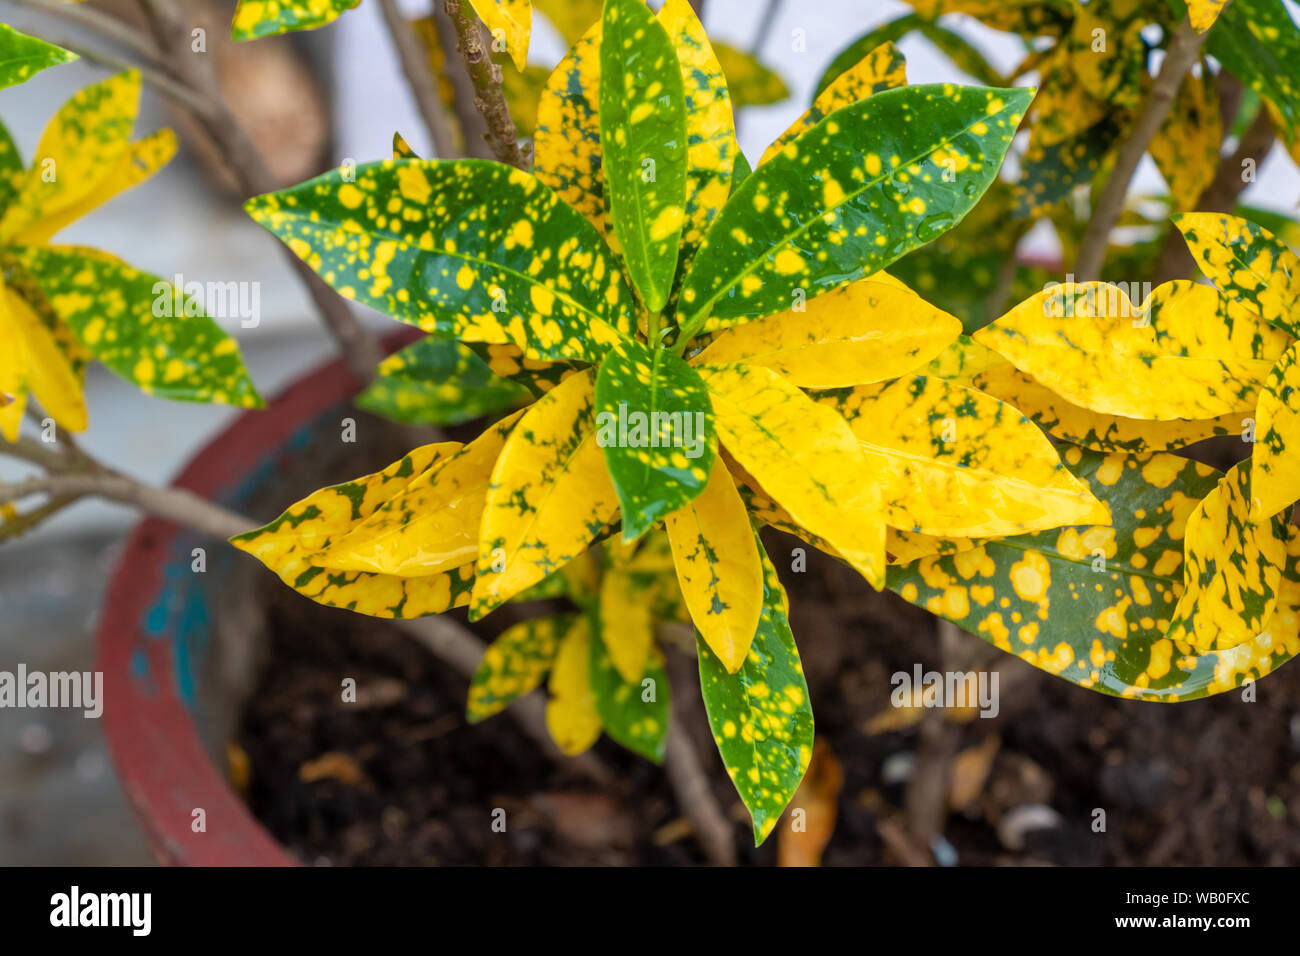 Leaf of Codiaeum Variegatum Tree Croton Plant, Colorful green and yellow leafs. Stock Photo